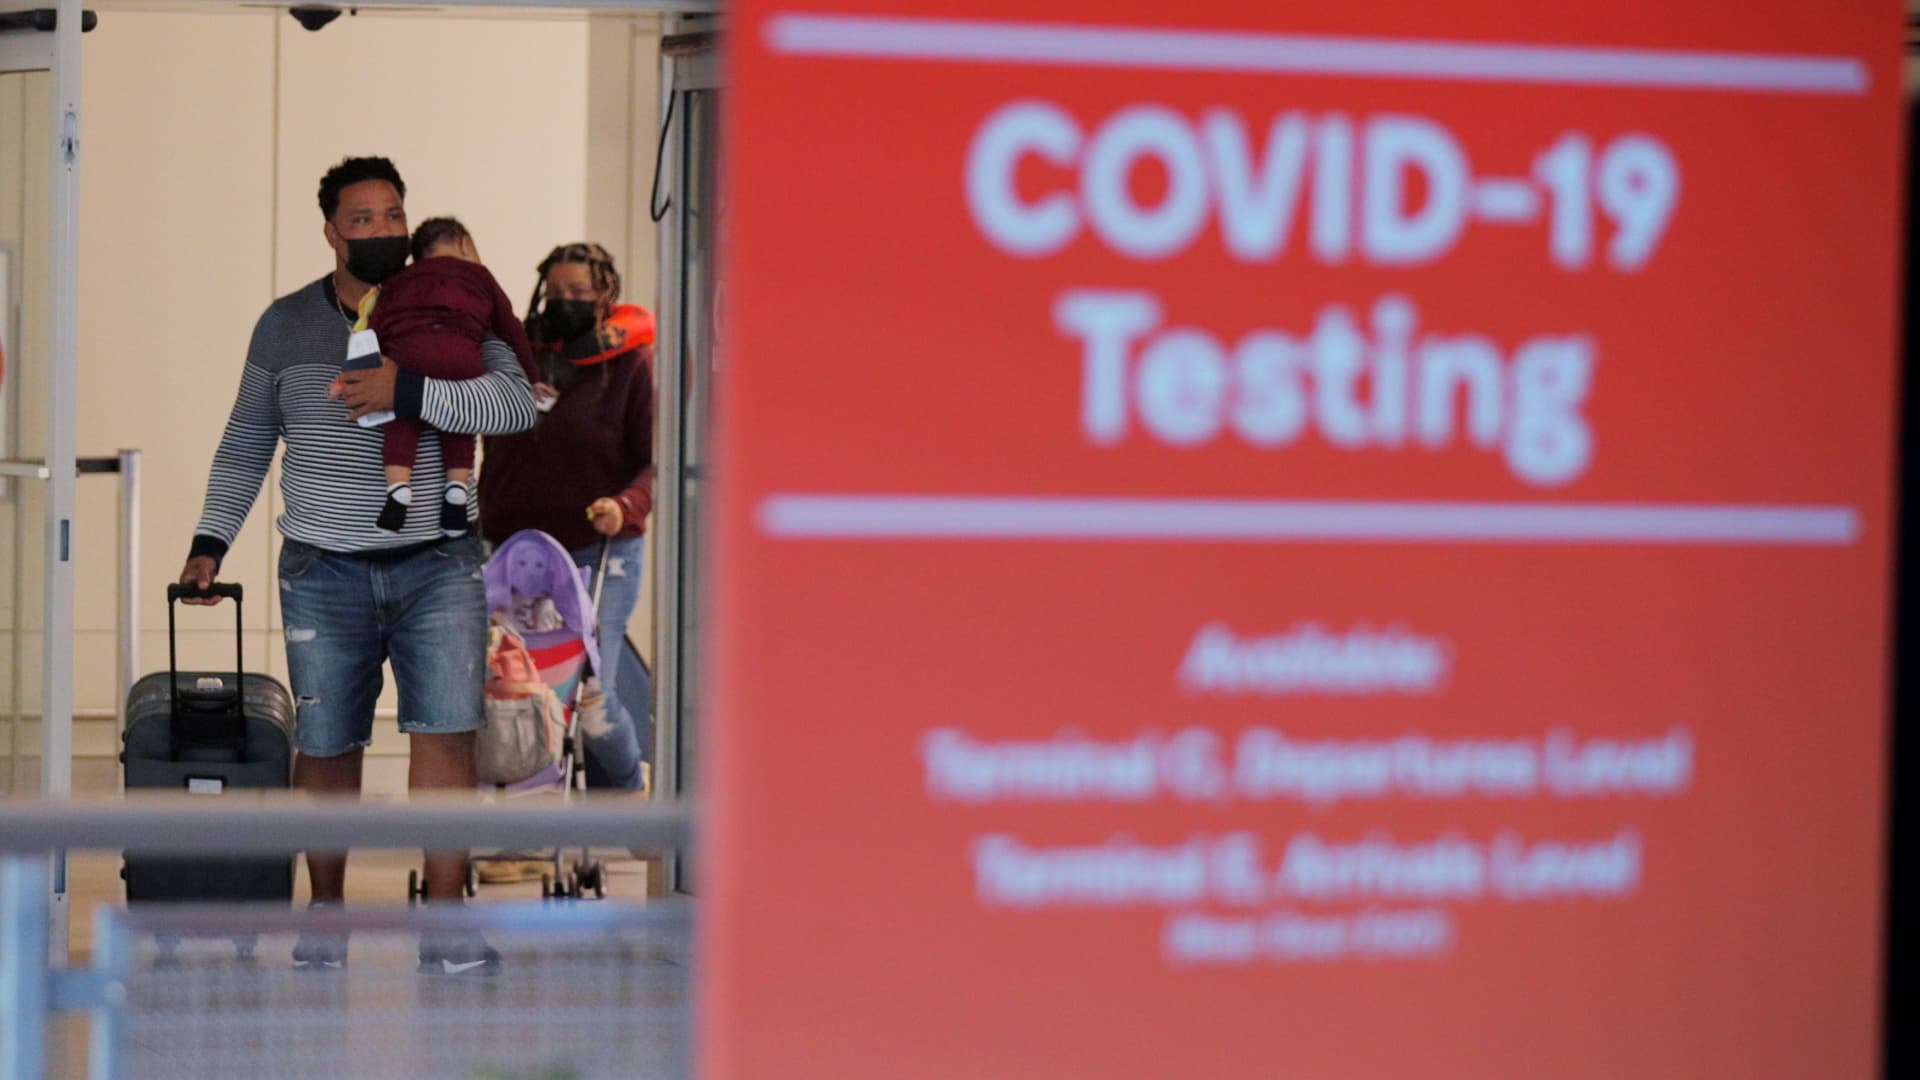 International travellers arrive from the Dominican Republic, as the U.S. reopens air and land borders to vaccinated travellers for the first time since coronavirus disease (COVID-19) restrictions were imposed, at Logan International Airport in Boston, Massachusetts, U.S., November 8, 2021.